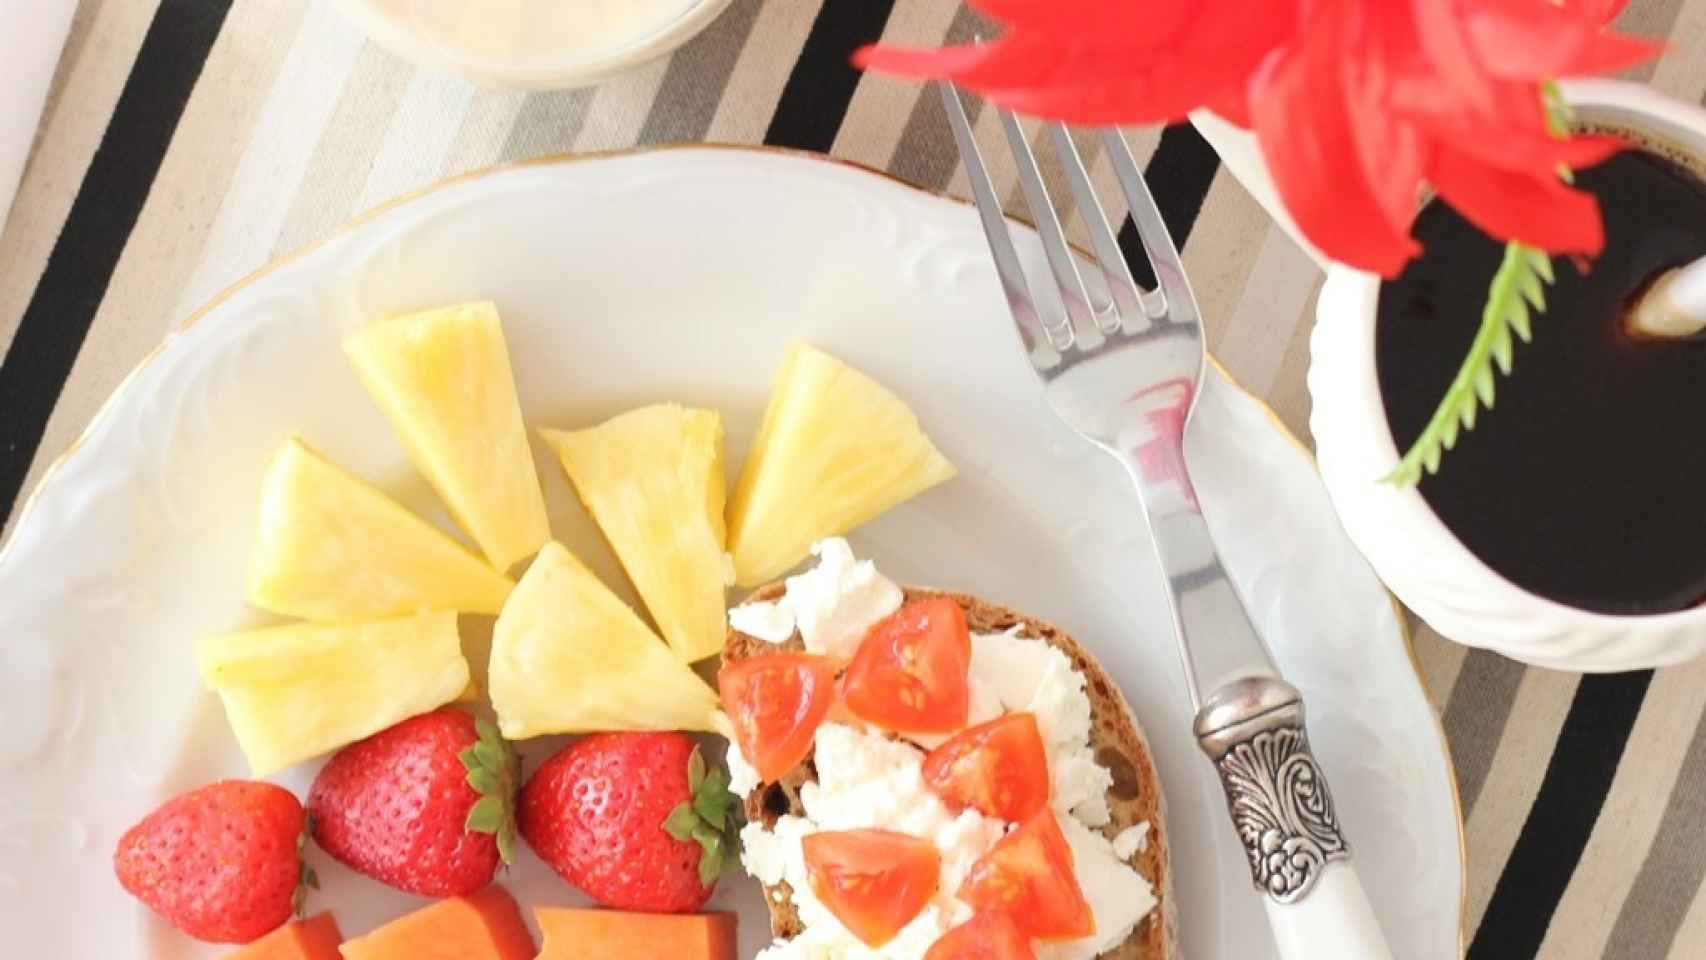 Pan tostado, queso cottage, tomate y fruta